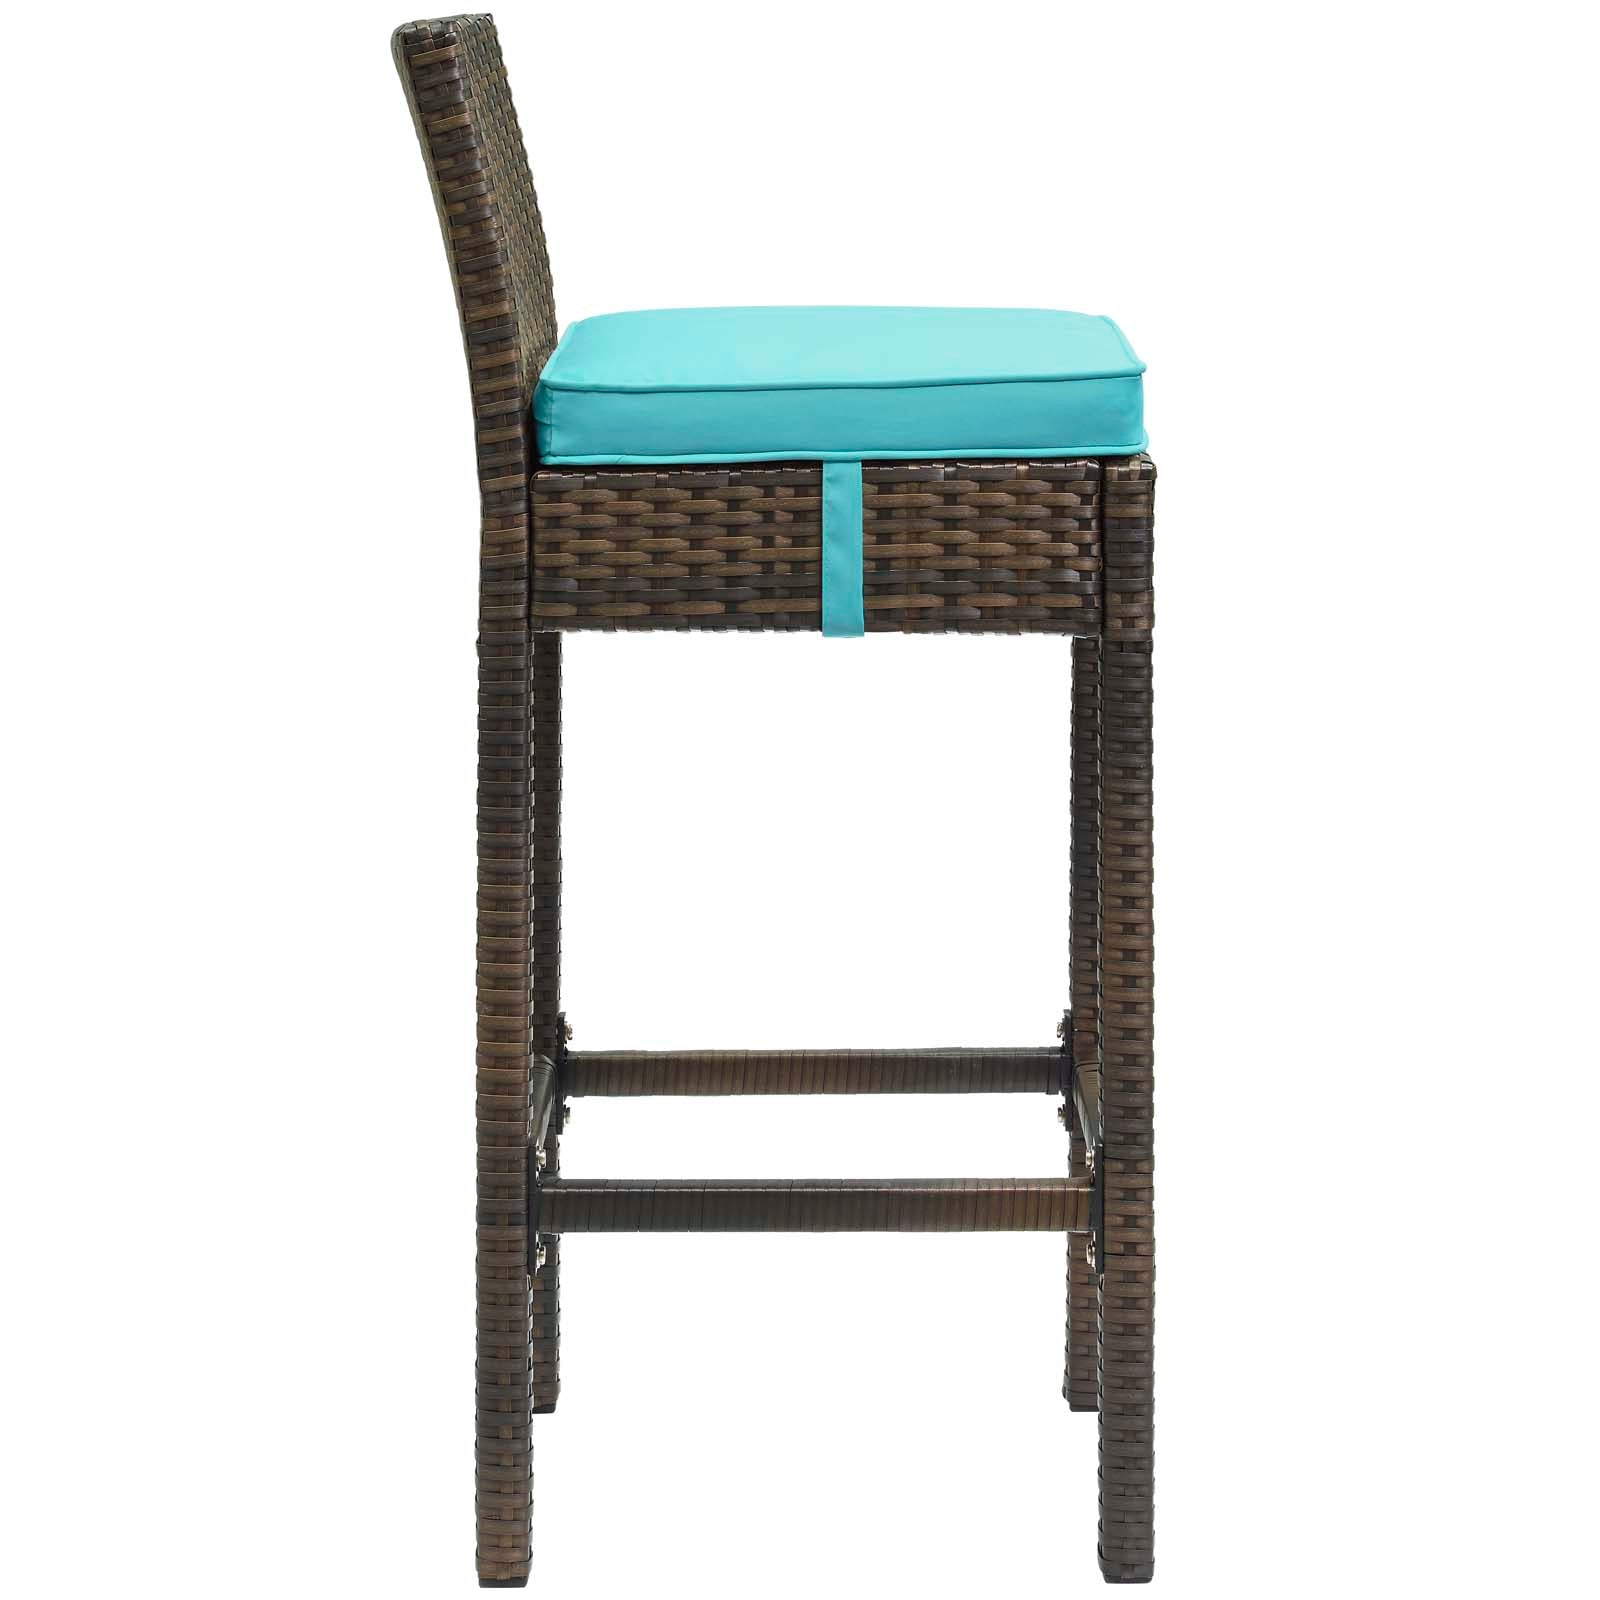 Modway Outdoor Barstools - Conduit Bar Stool Outdoor Patio Wicker Rattan Set of 2 Brown Turquoise